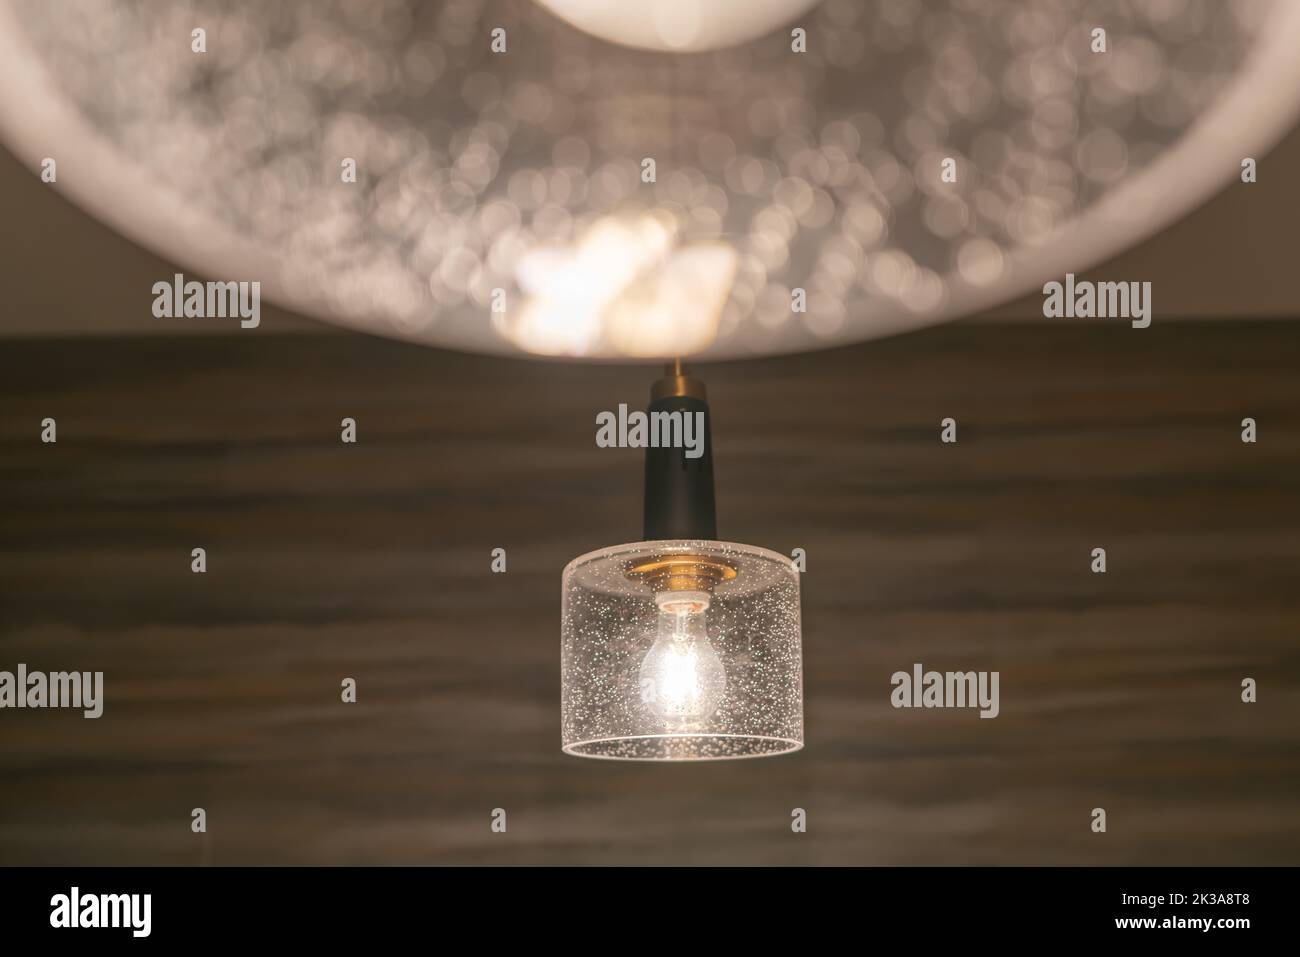 Hanging incandescent light bulb with tungsten filaments with a wall background. Stock Photo